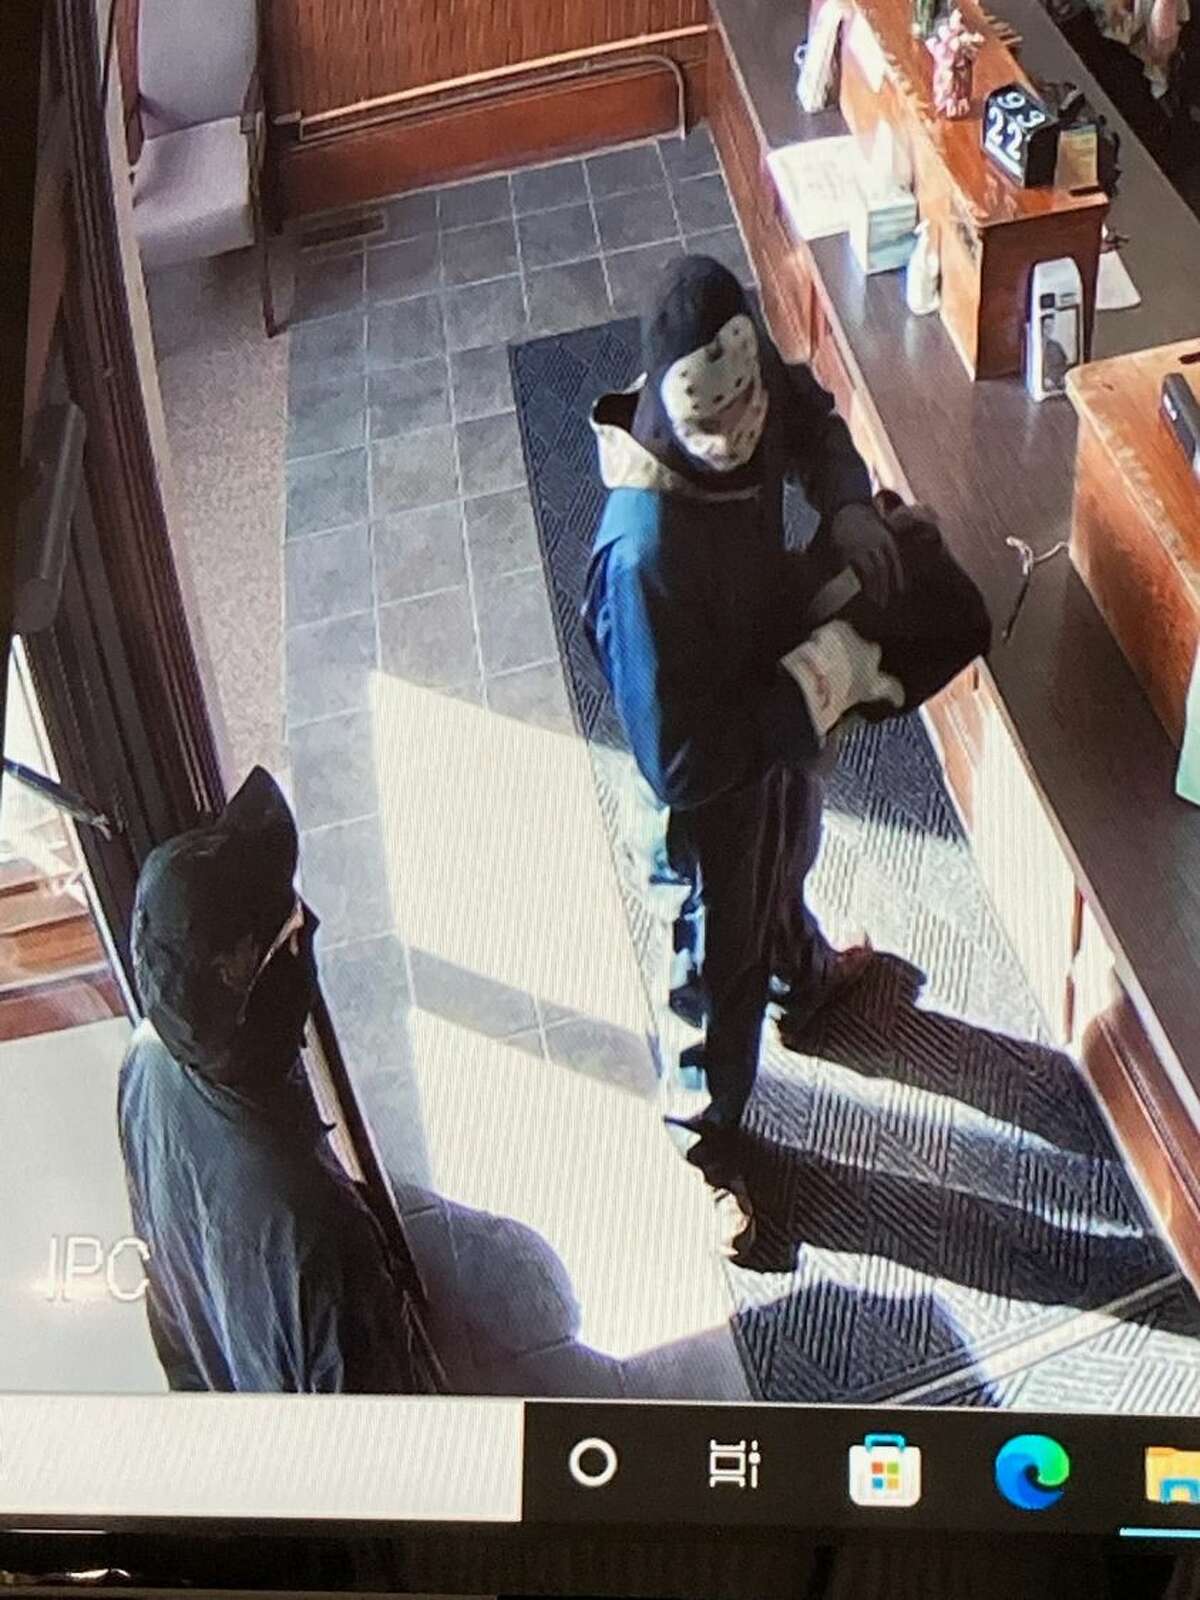 Police are searching for two subjects who robbed a bank in Luther on Sept. 22, initiating the lock down and evacuation of Baldwin Community Schools.